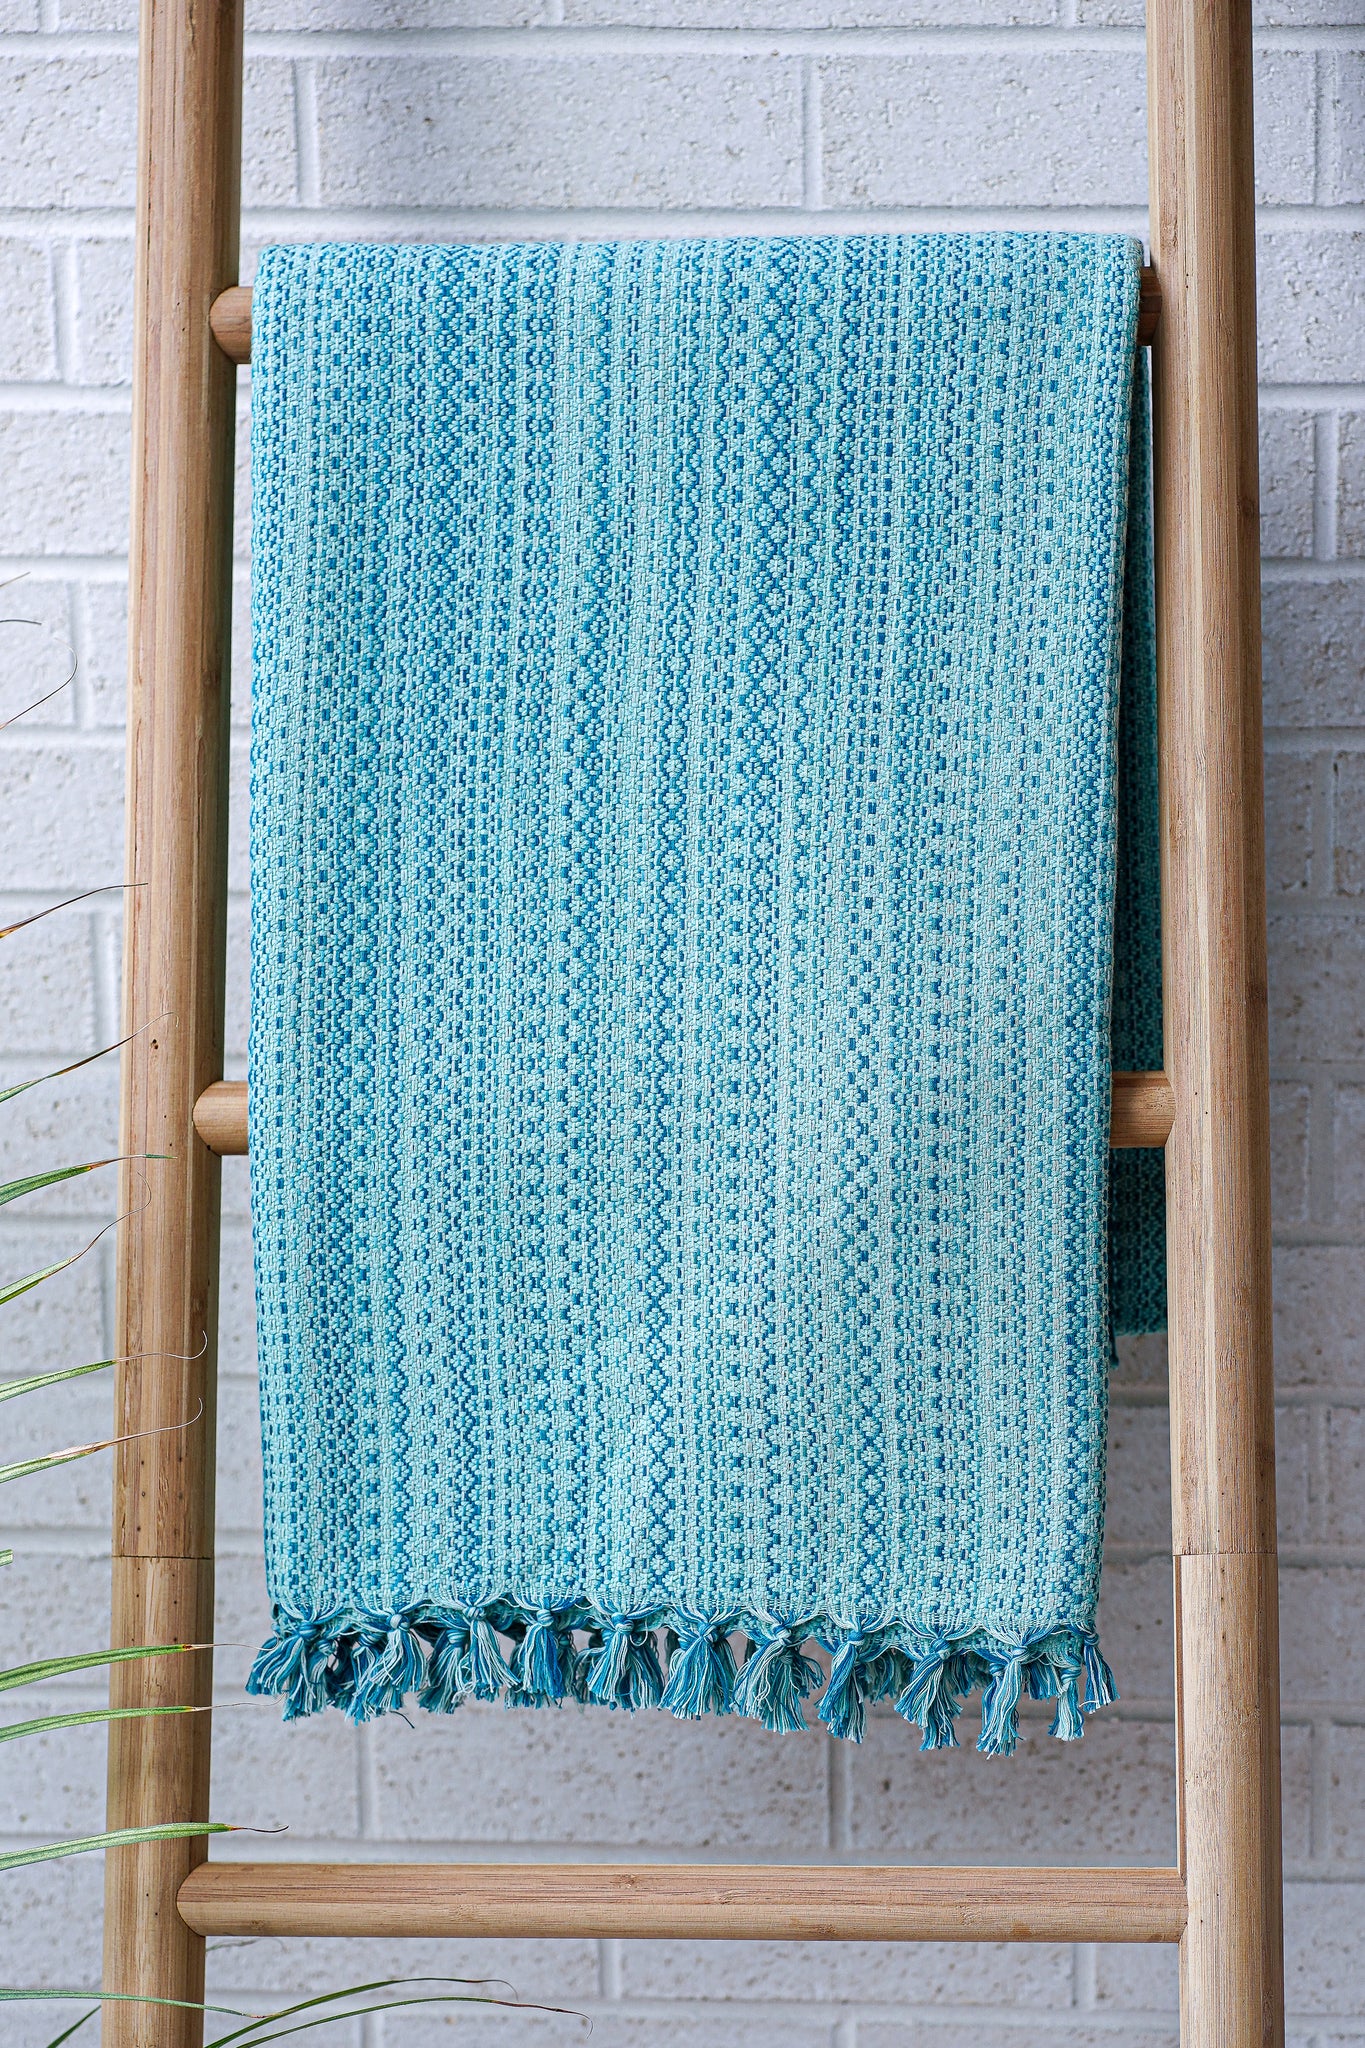 Handwoven throw blanket, 100% cotton and all natural dyes that brings comfort and style to your home.